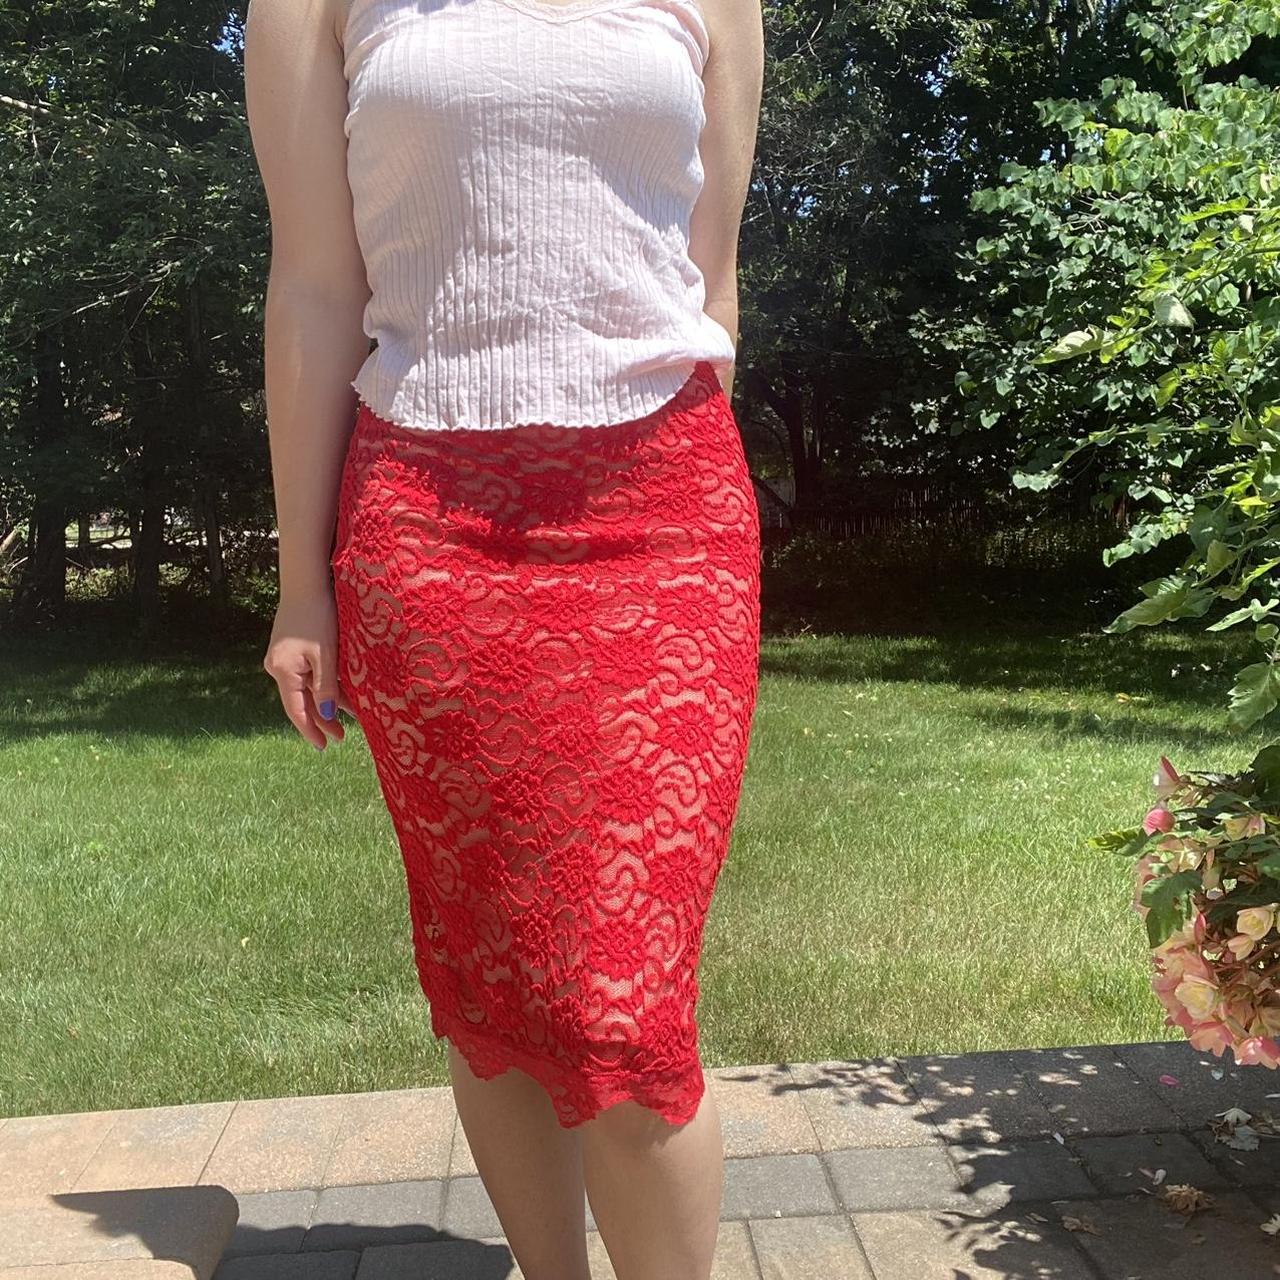 Red Lace Skirt ️ Nude Lining Size Small Slightly Depop